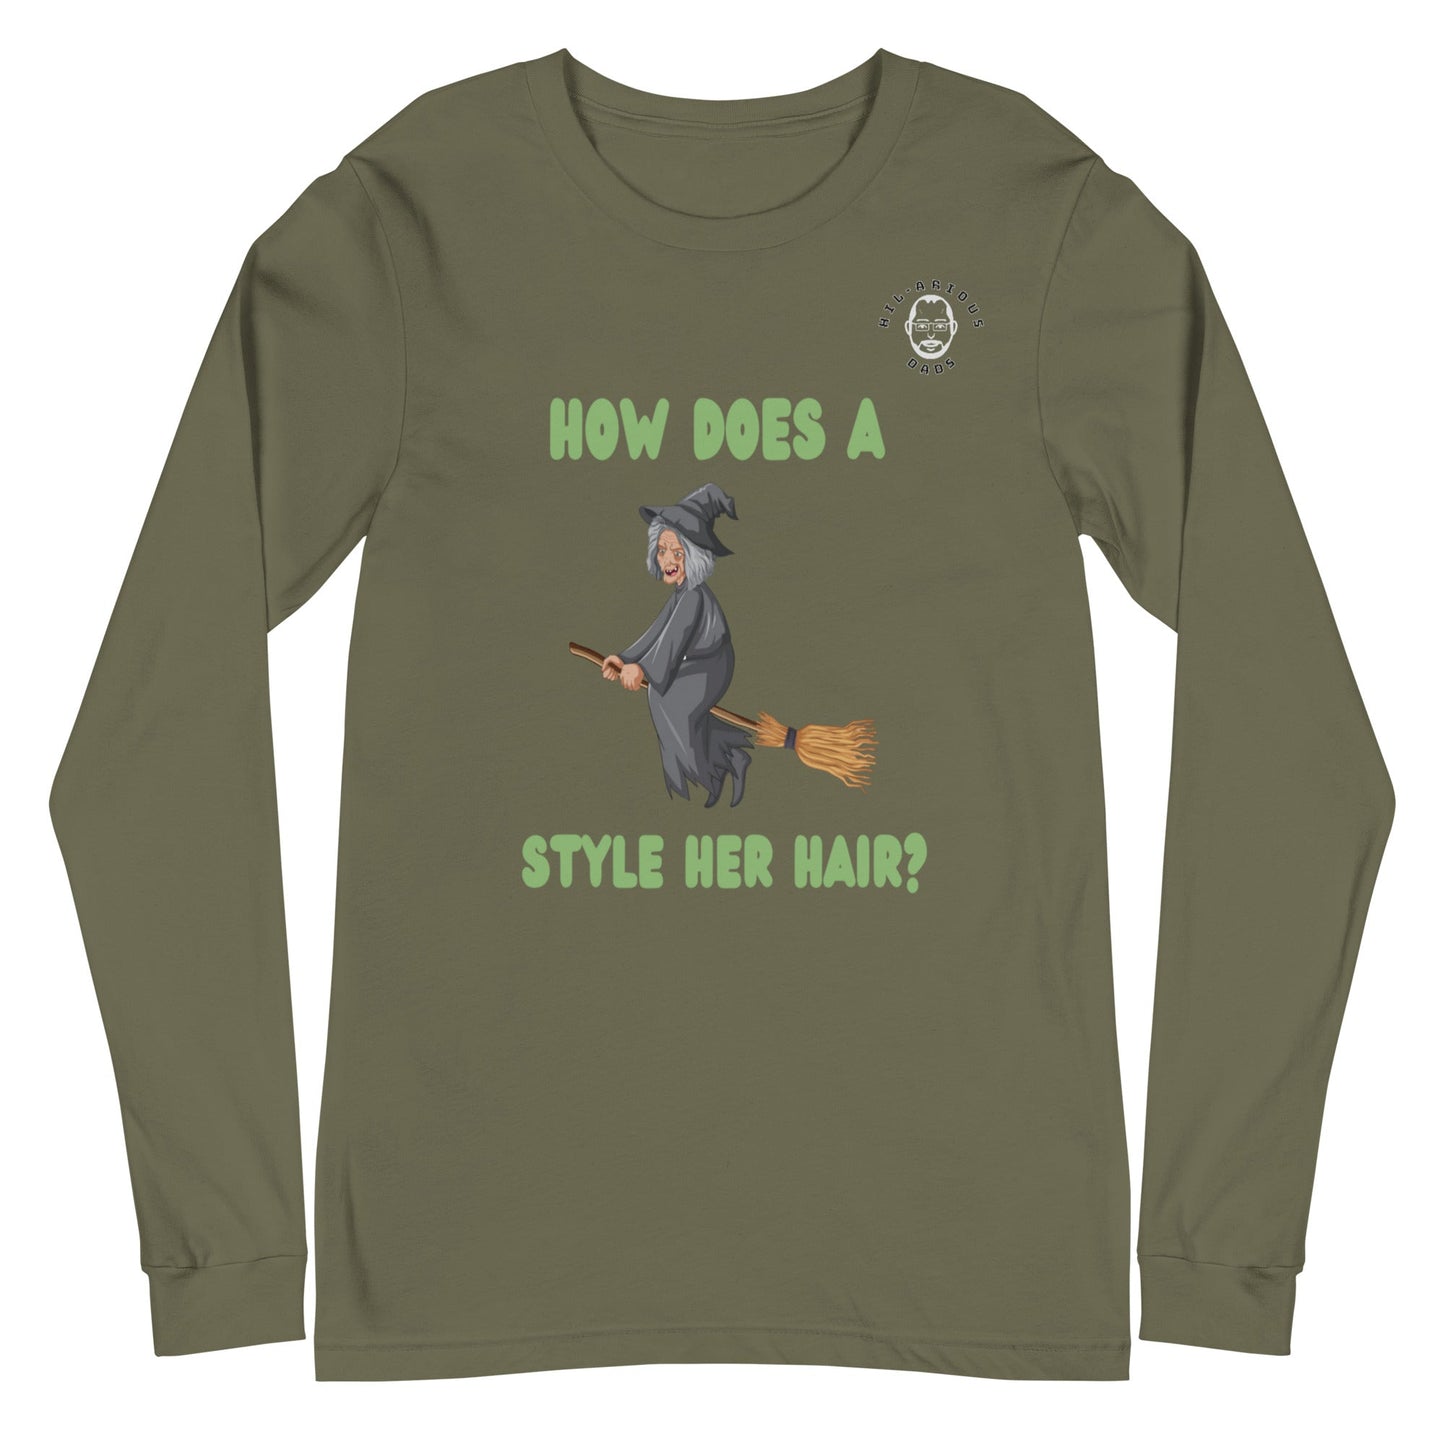 How does a witch style her hair?-Long Sleeve Tee - Hil-arious Dads